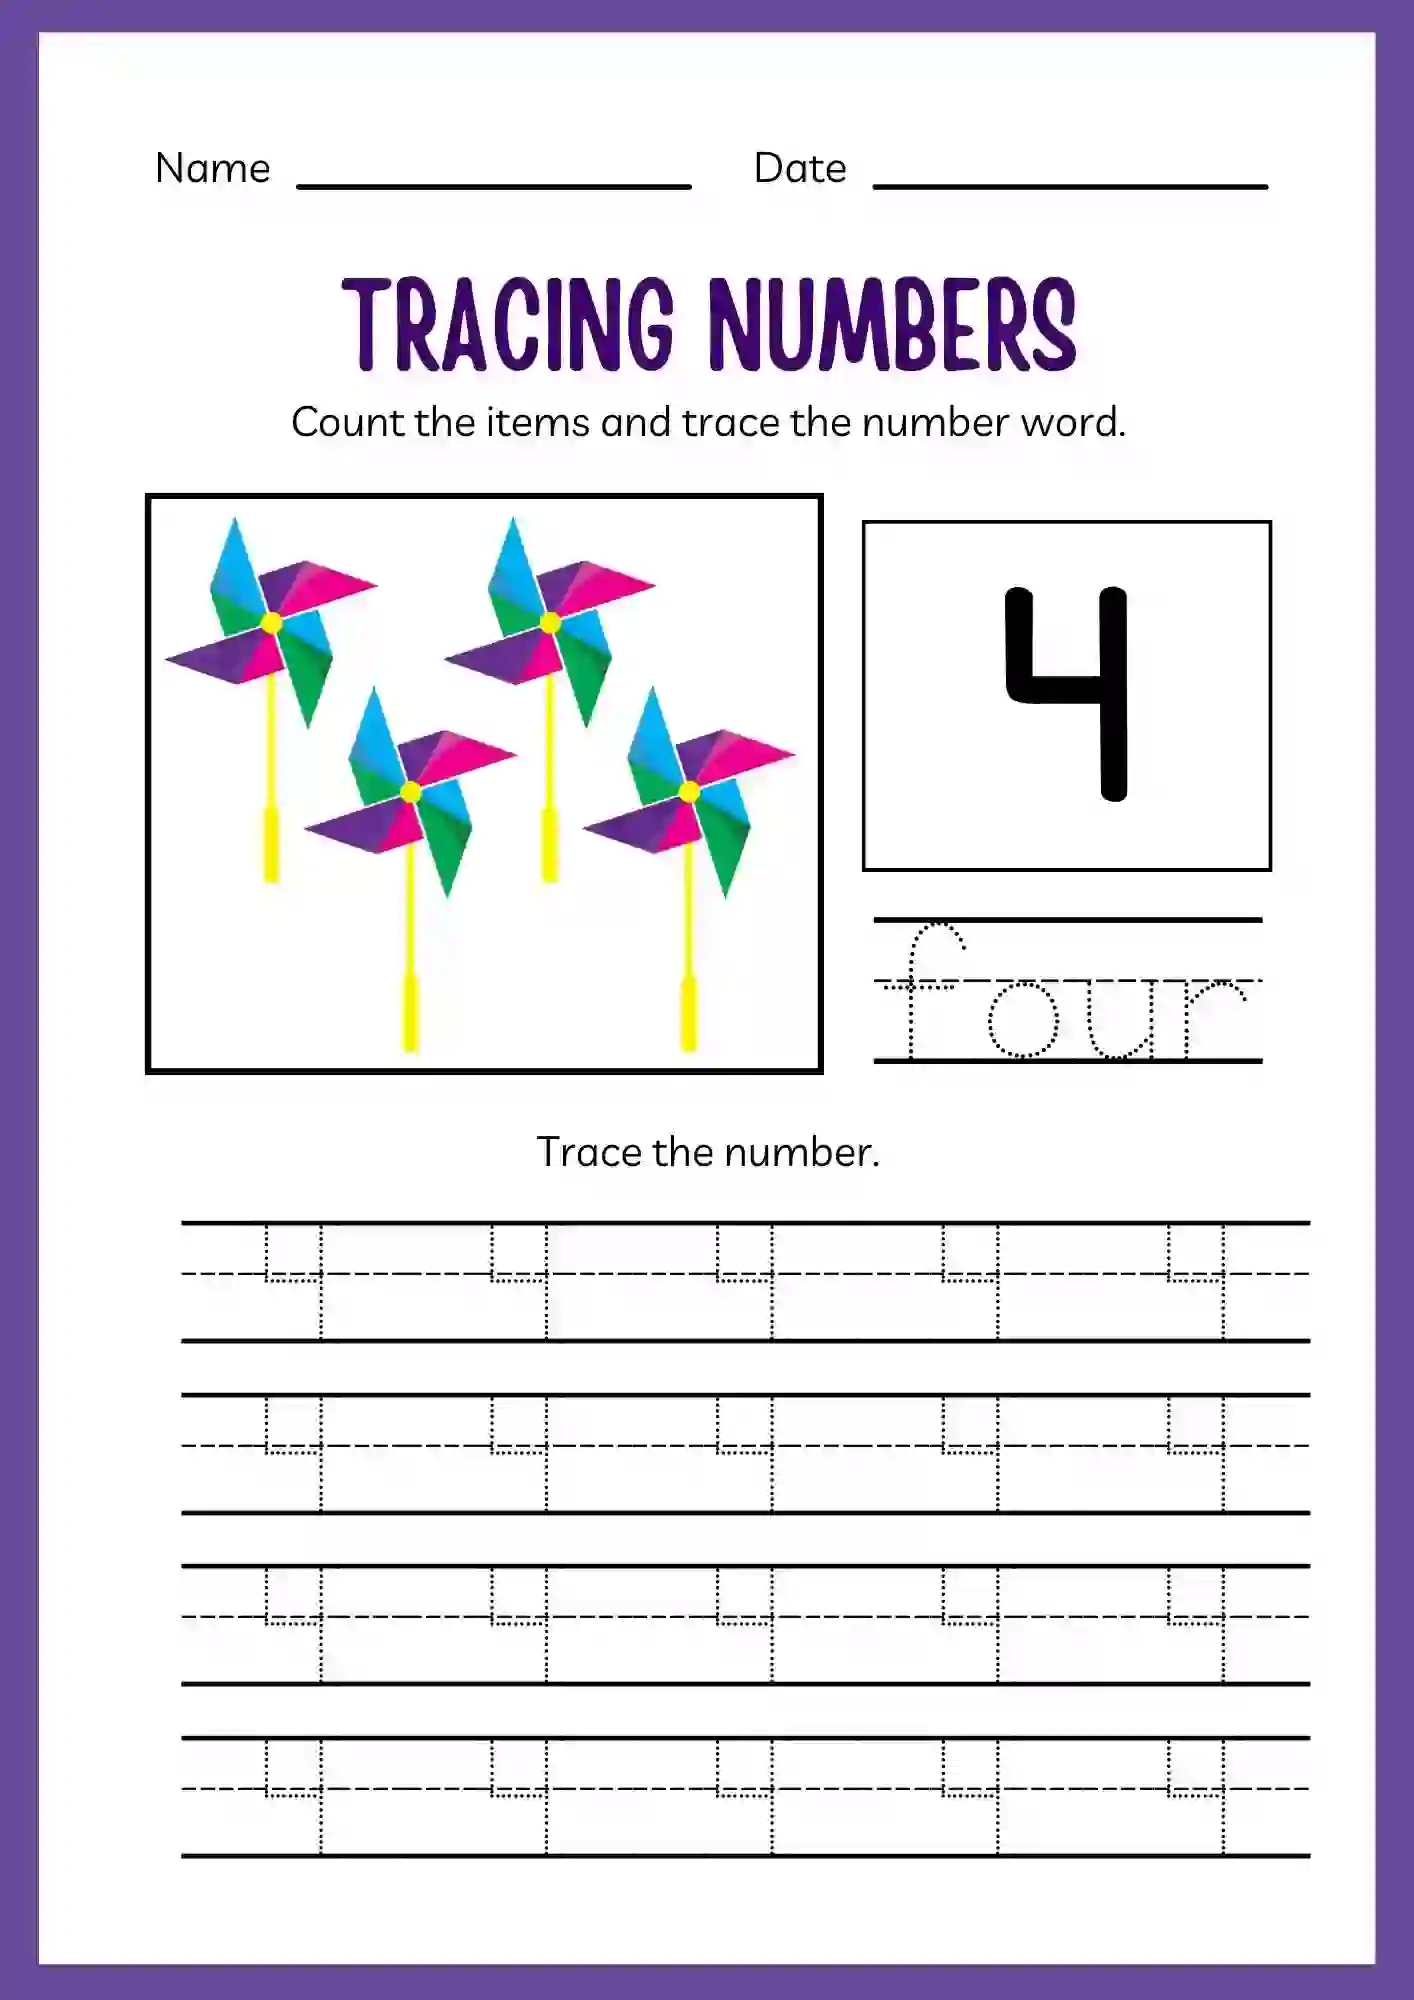 Number Tracing Worksheets 1 to 20 (Number 4 tracing sheet)